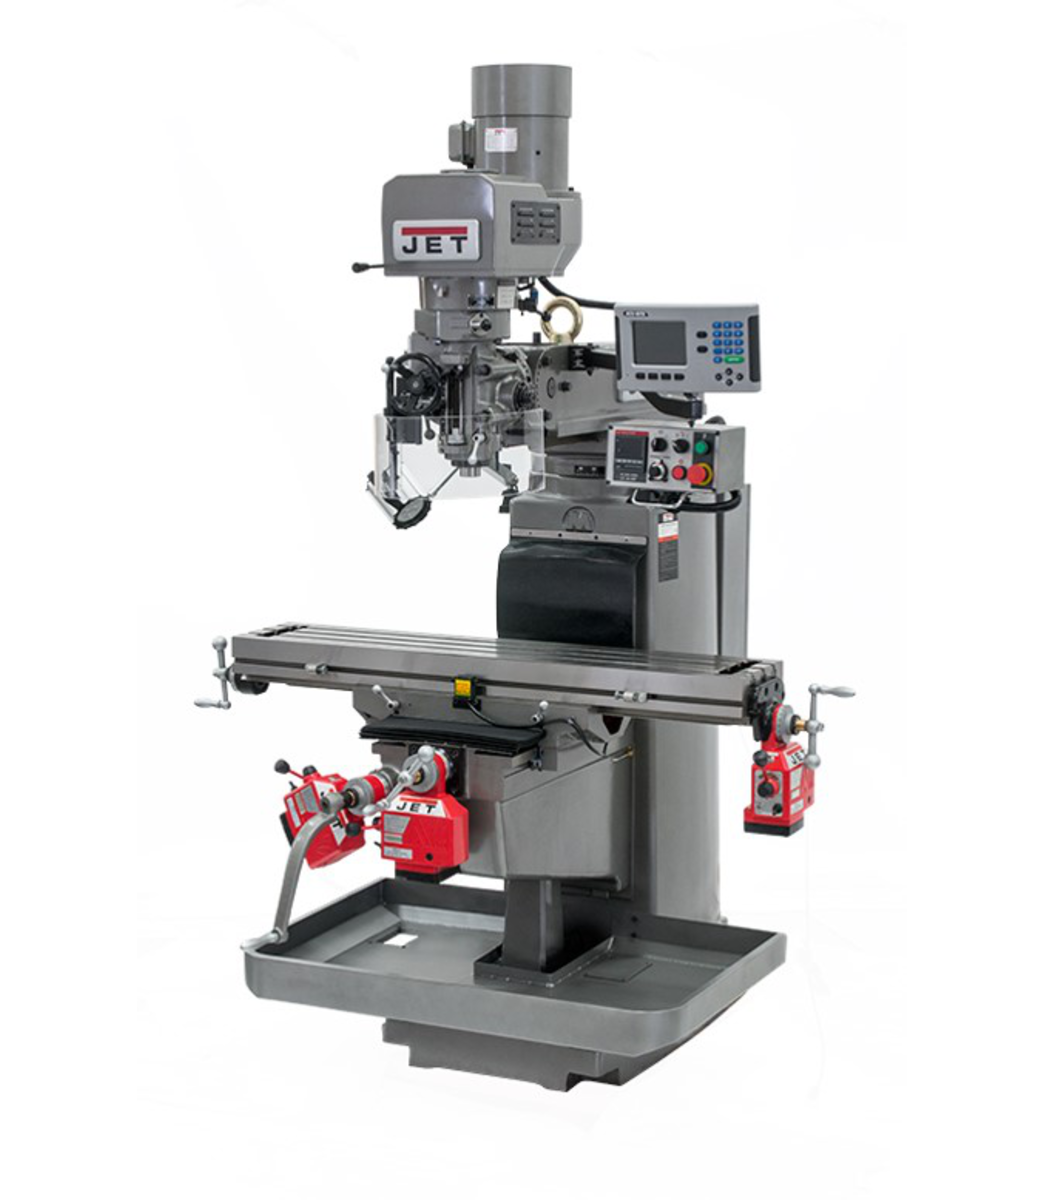 690650, JET JTM-1050EVS2 Vertical Milling Machines are durable enough to be the workhourses of your operation, and come with add-ons and features that give you great milling flexibility